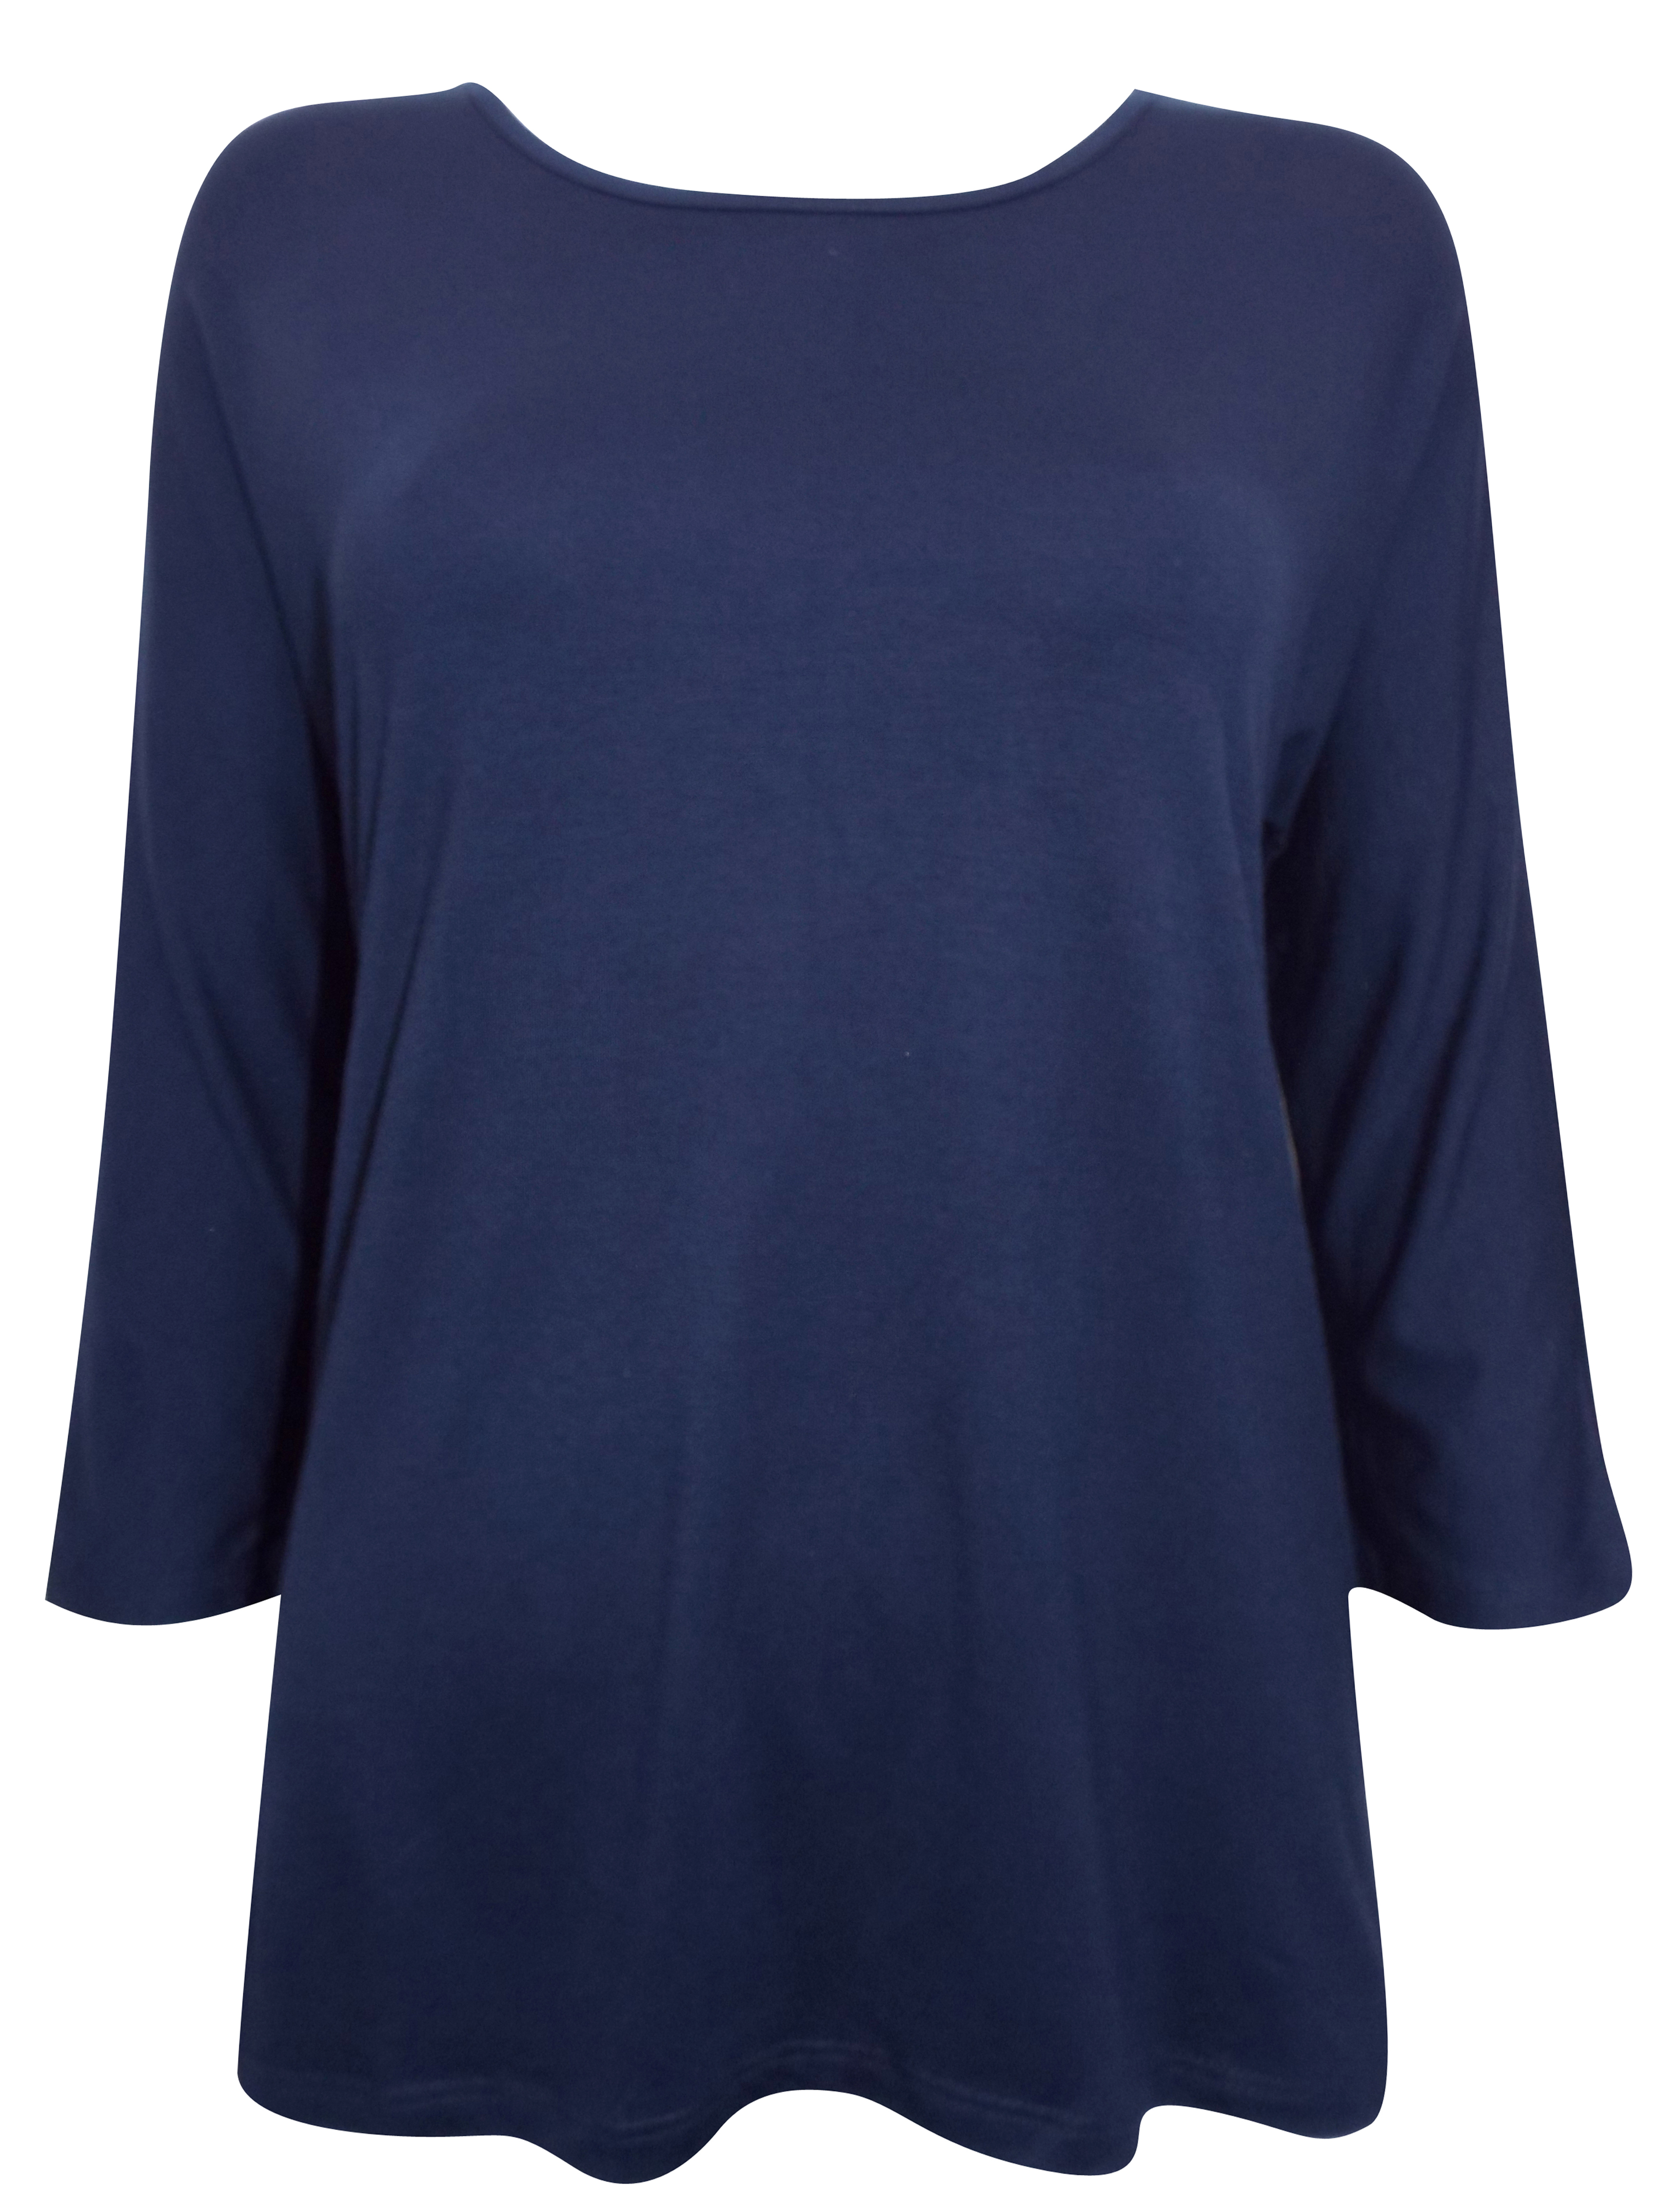 First Avenue NAVY Dipped Hem Jersey Top with Necklace - Size 10 to 20